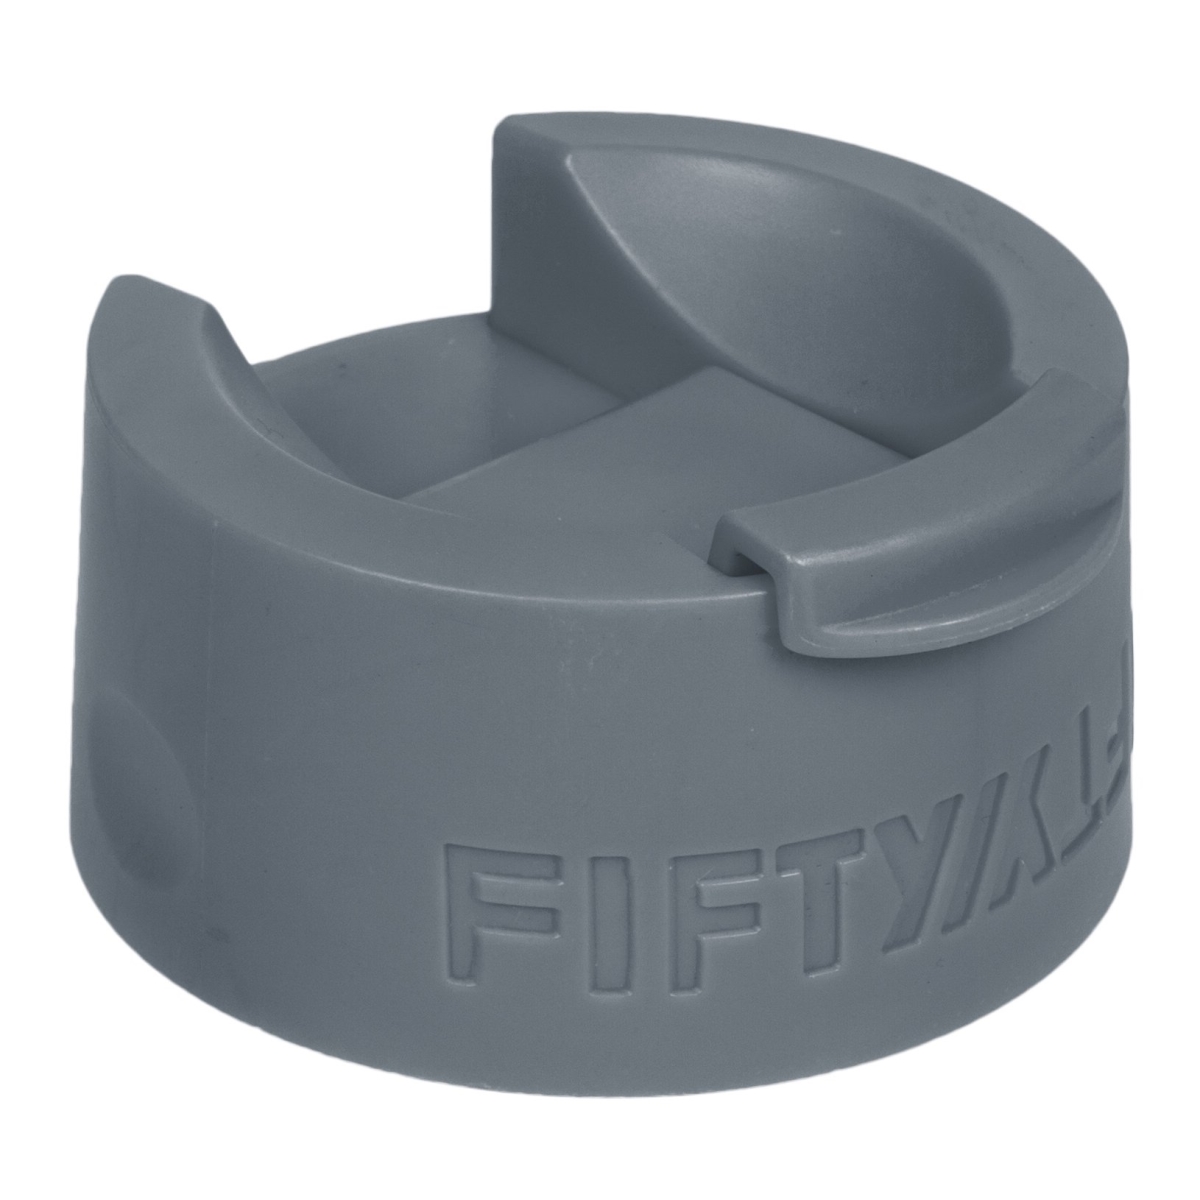 A68003sl0 Fifty & Fifty Wide-mouth Coffee Flip-top Cap, Slate Grey